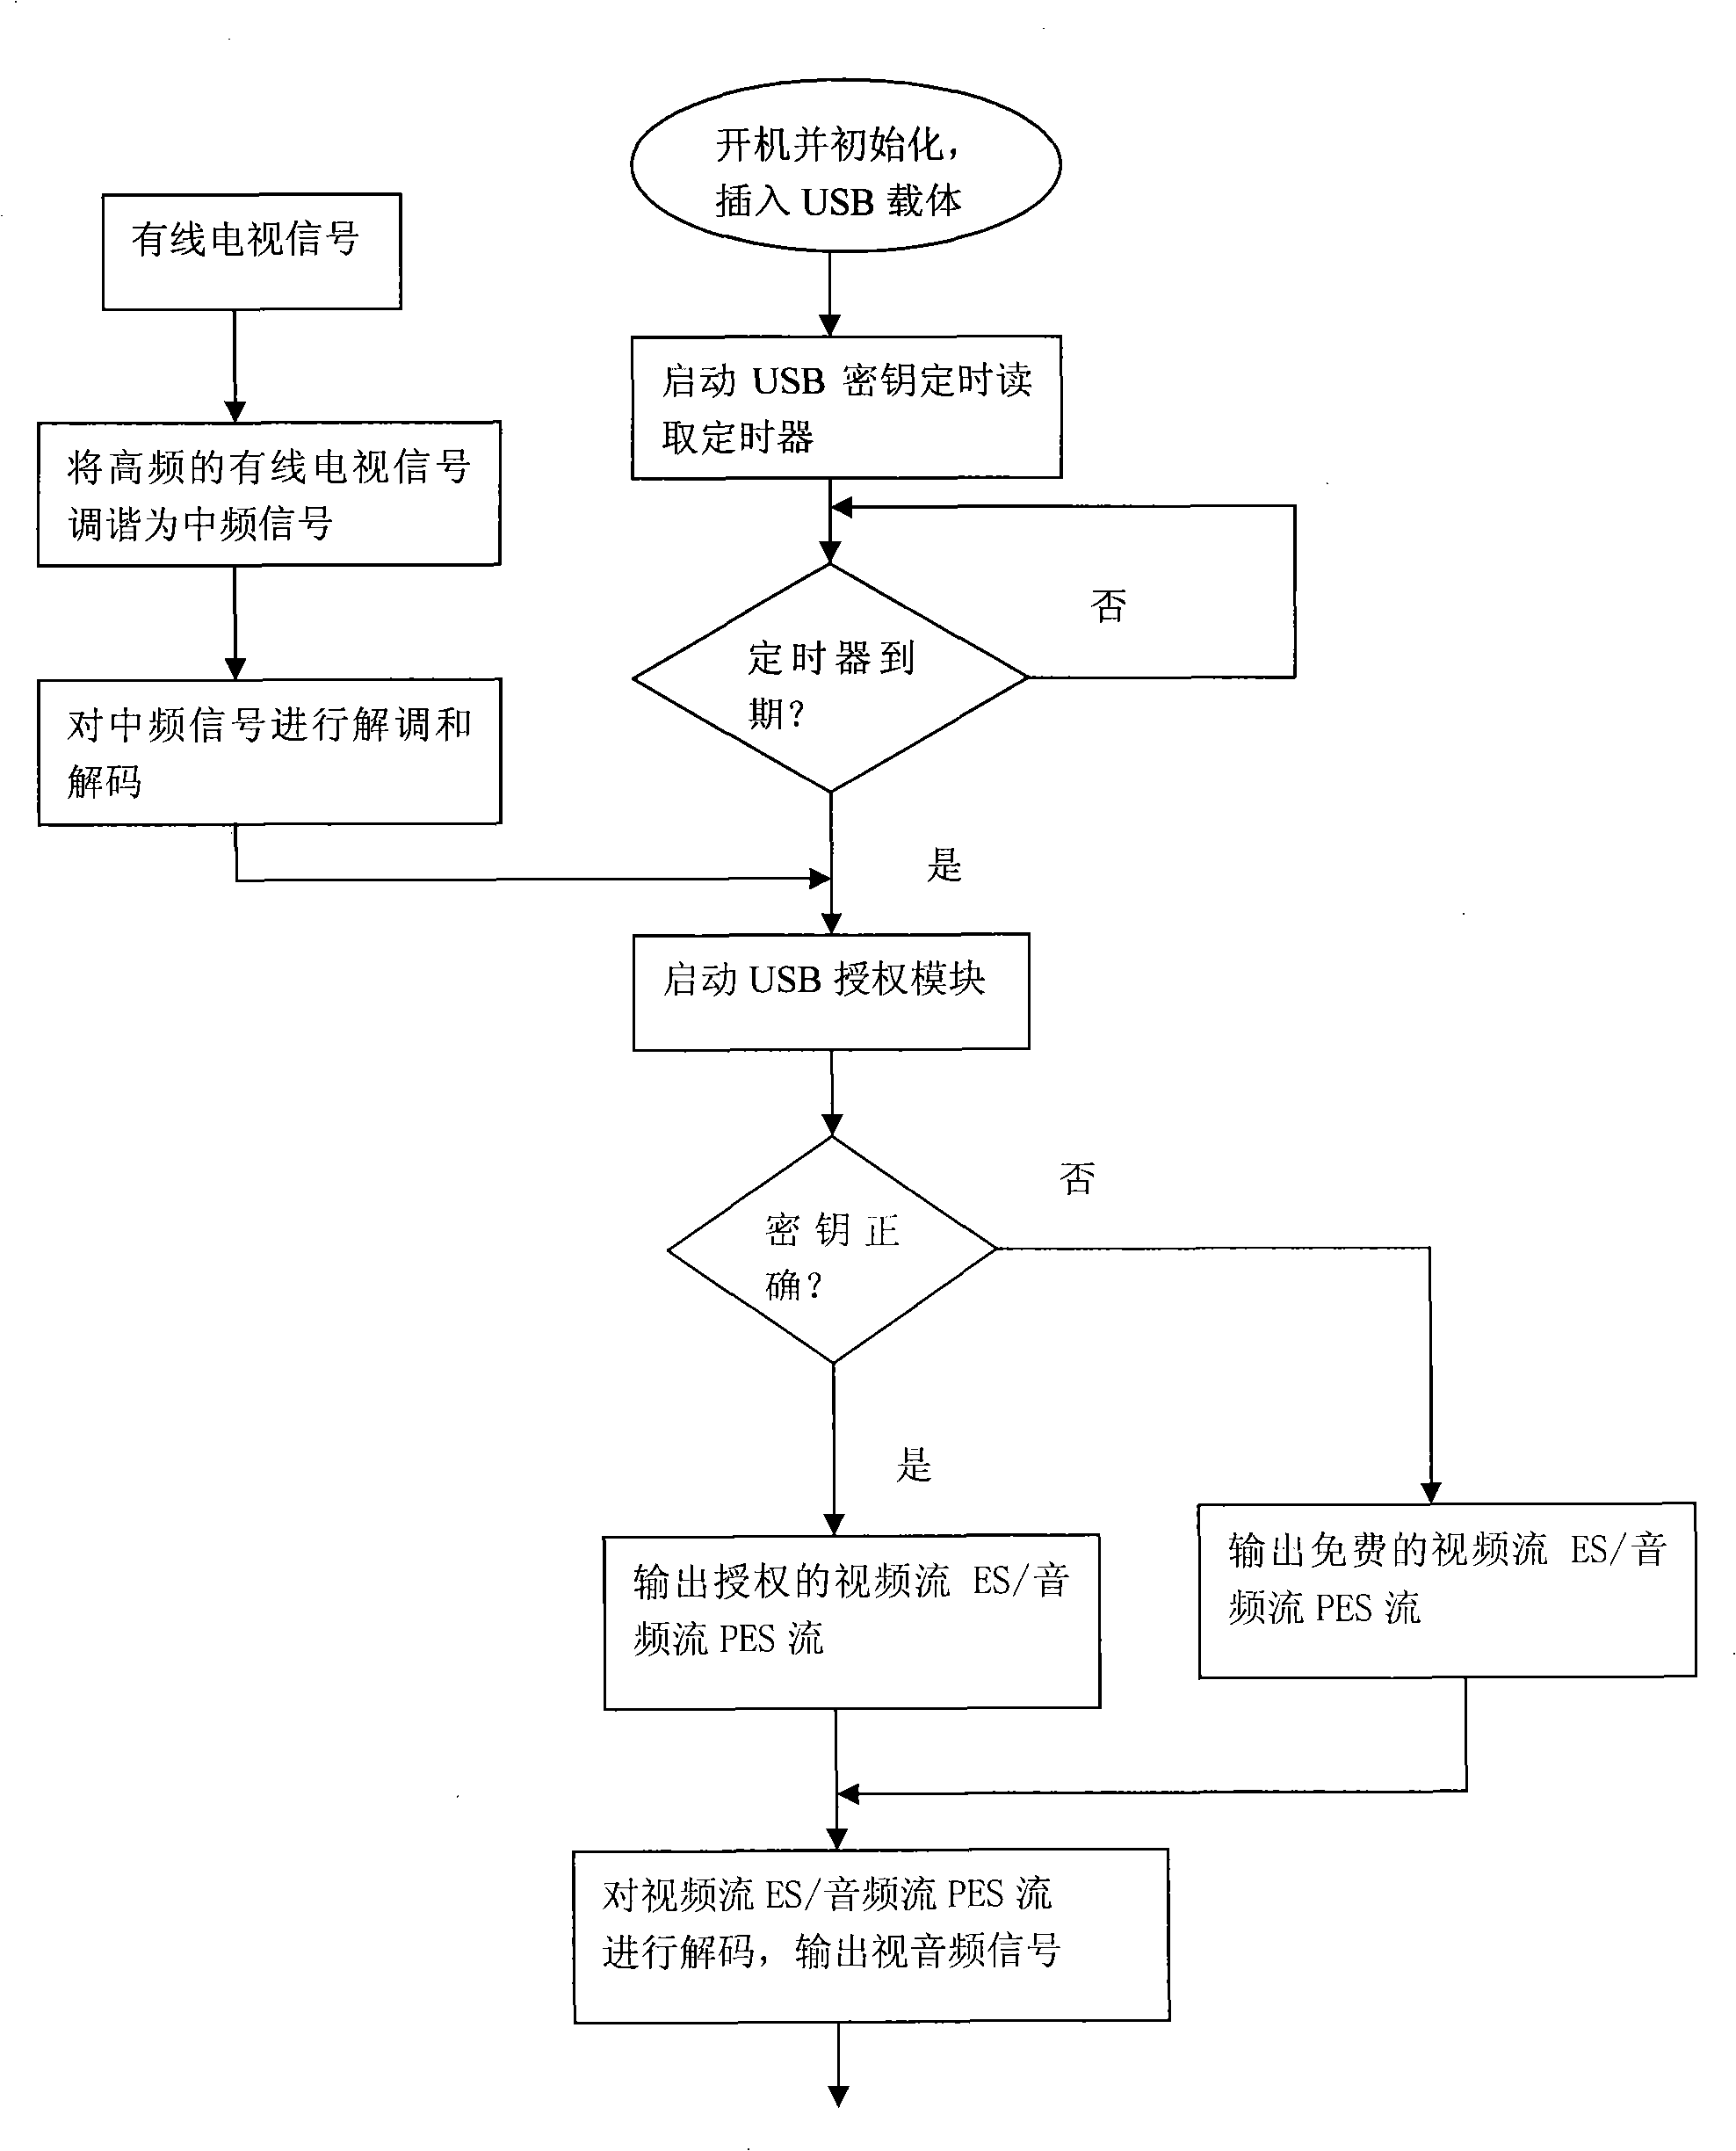 Digital television terminal implementing method based on USB authorization mode